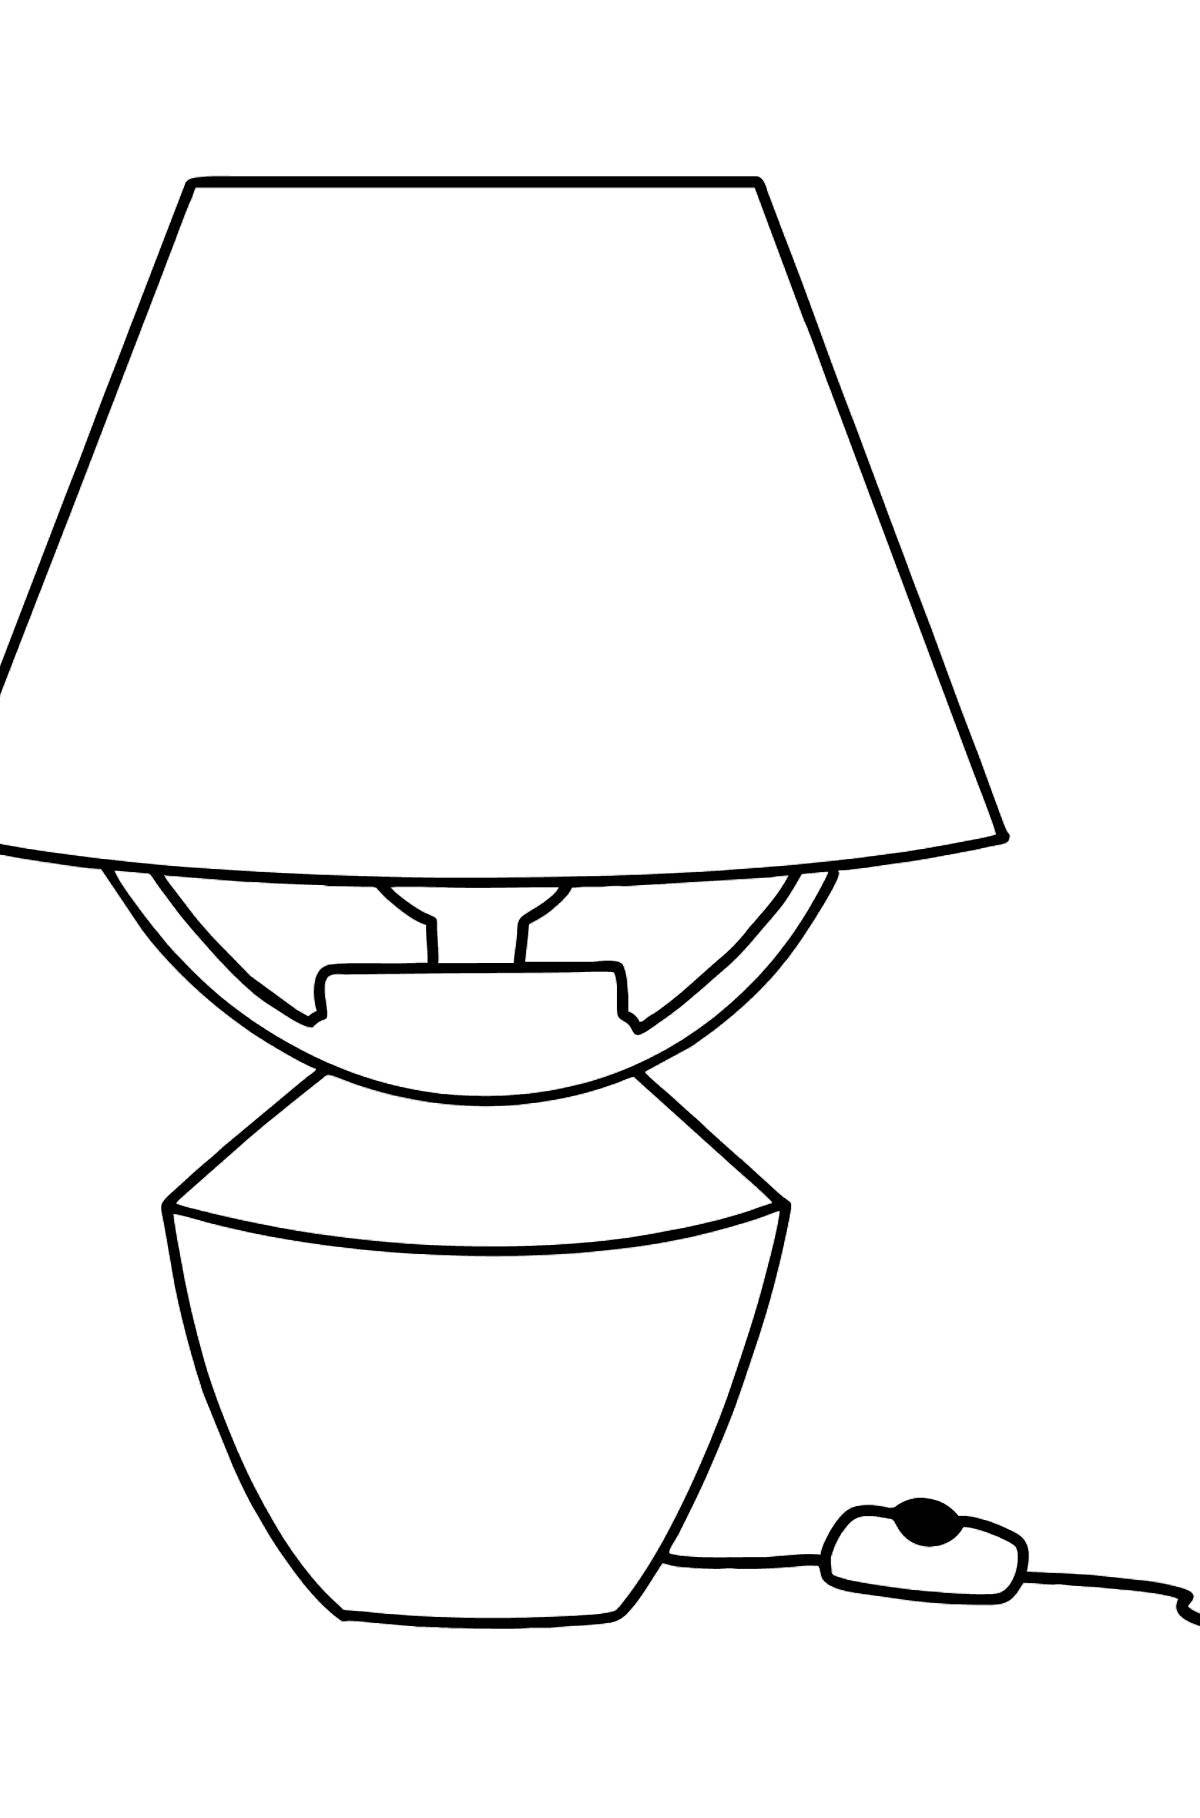 Great light bulb coloring book